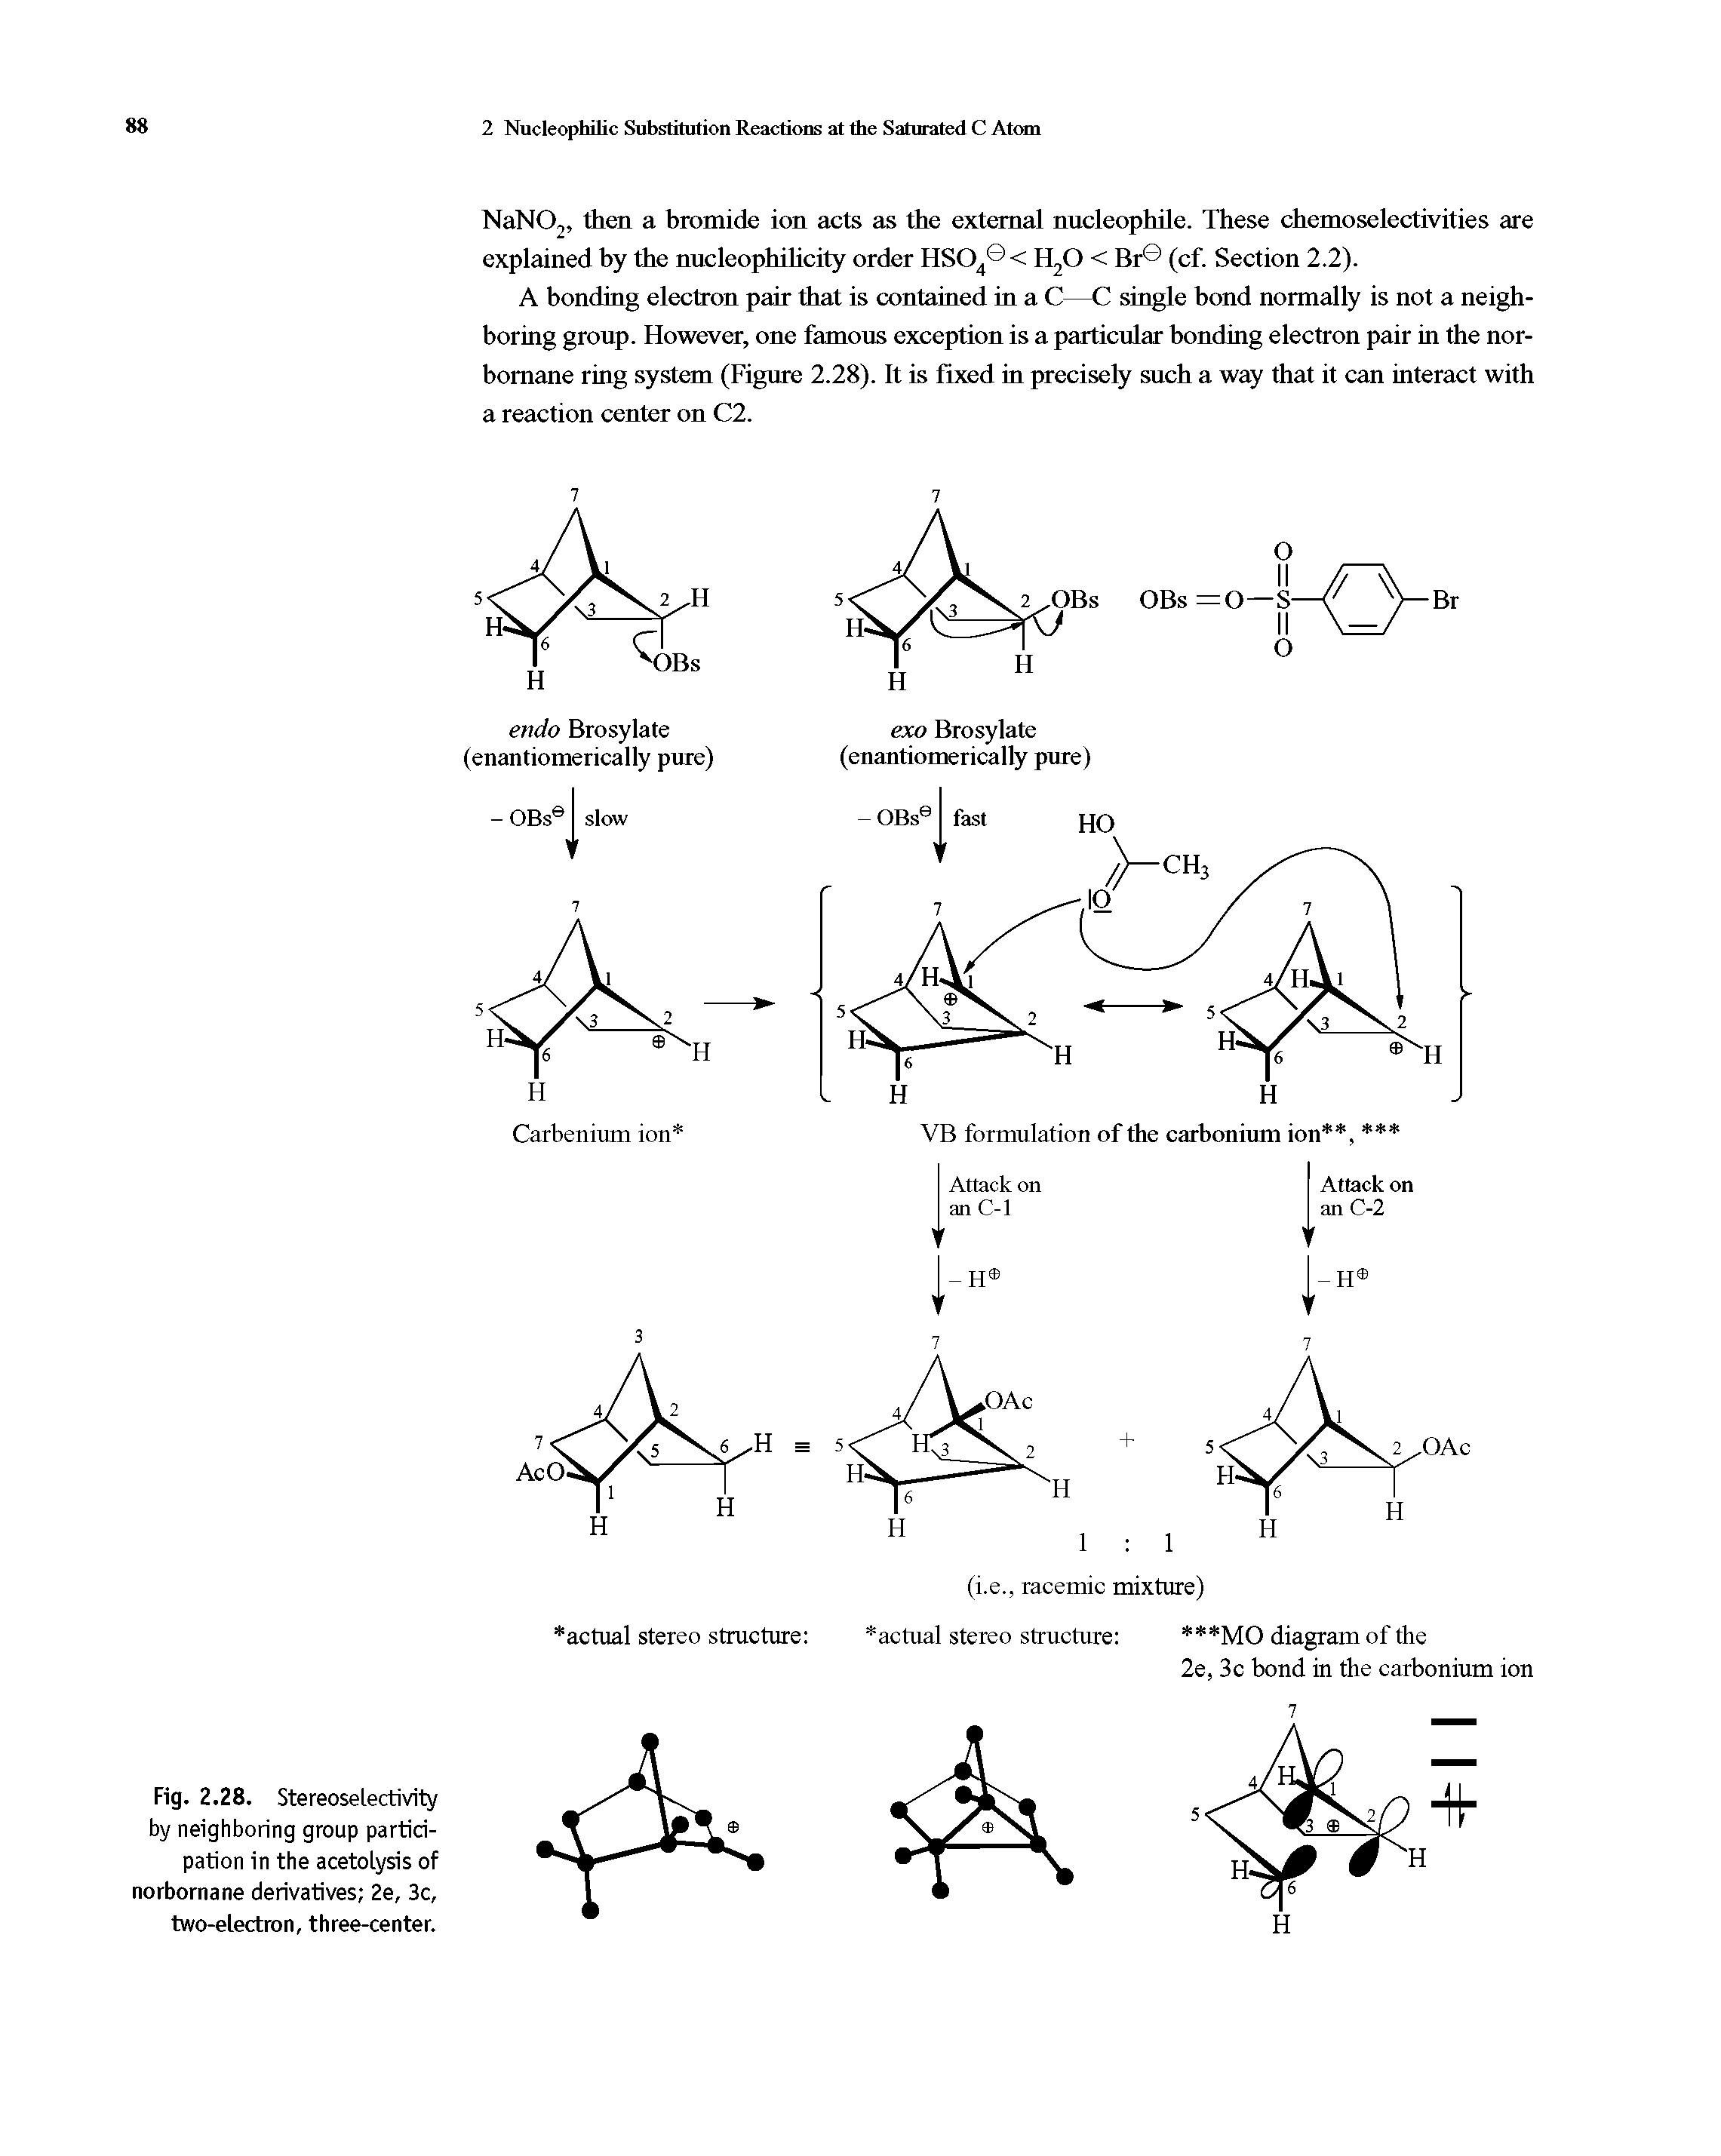 Fig. 2.28. Stereoselectivity by neighboring group participation in the acetolysis of norbornane derivatives 2e, 3c, two-electron, three-center.